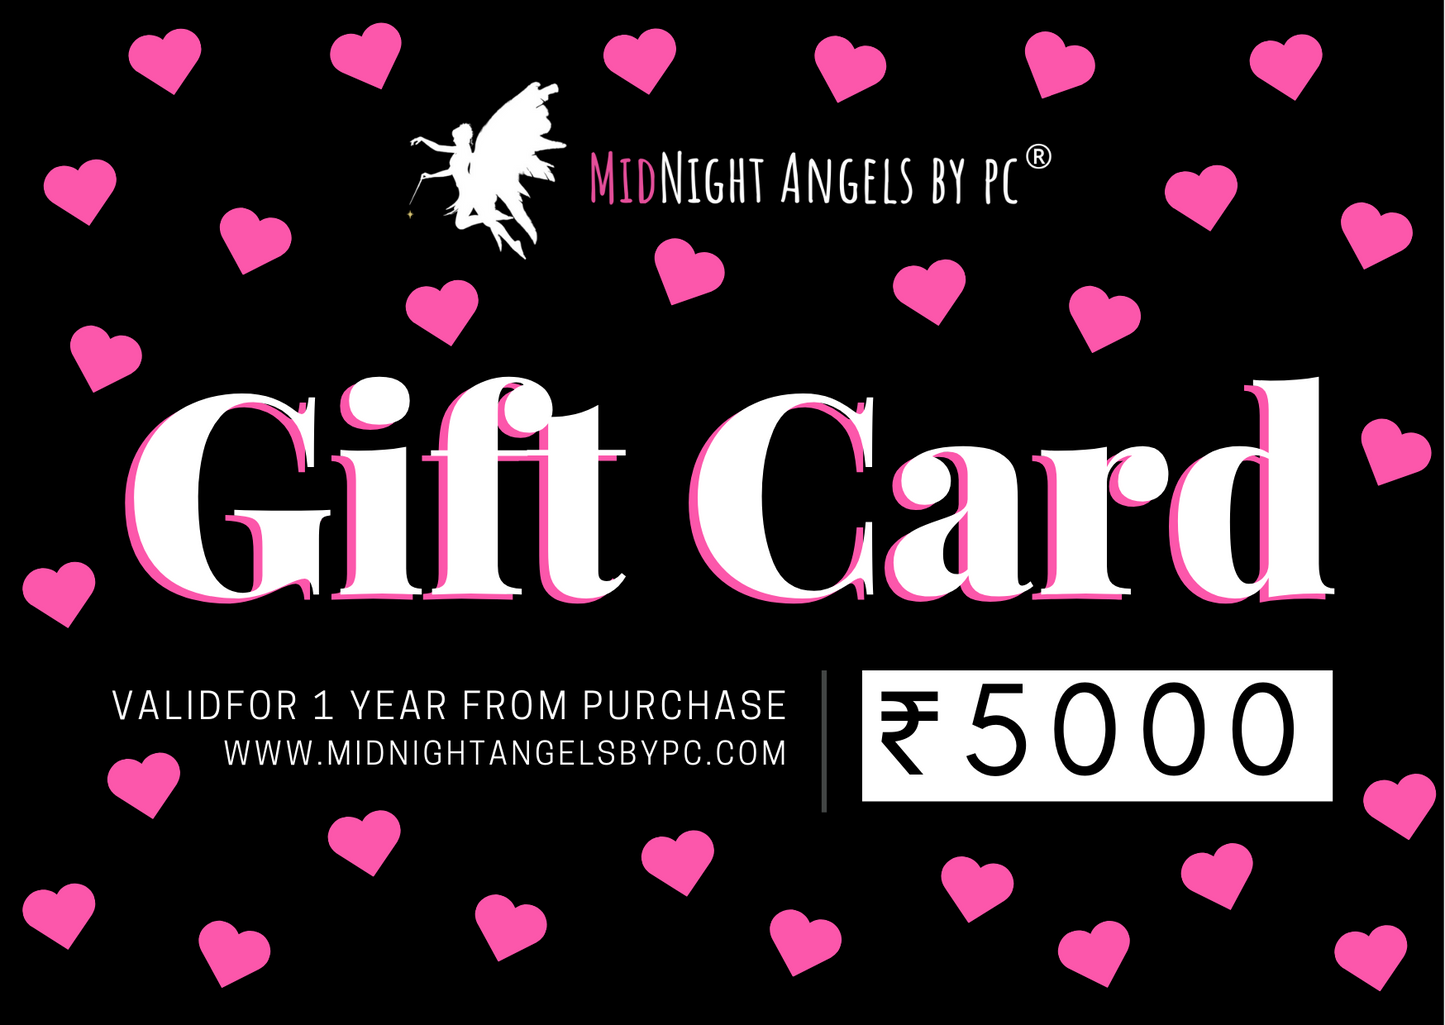 ₹5000/- MIDNIGHT ANGELS GIFT CARD